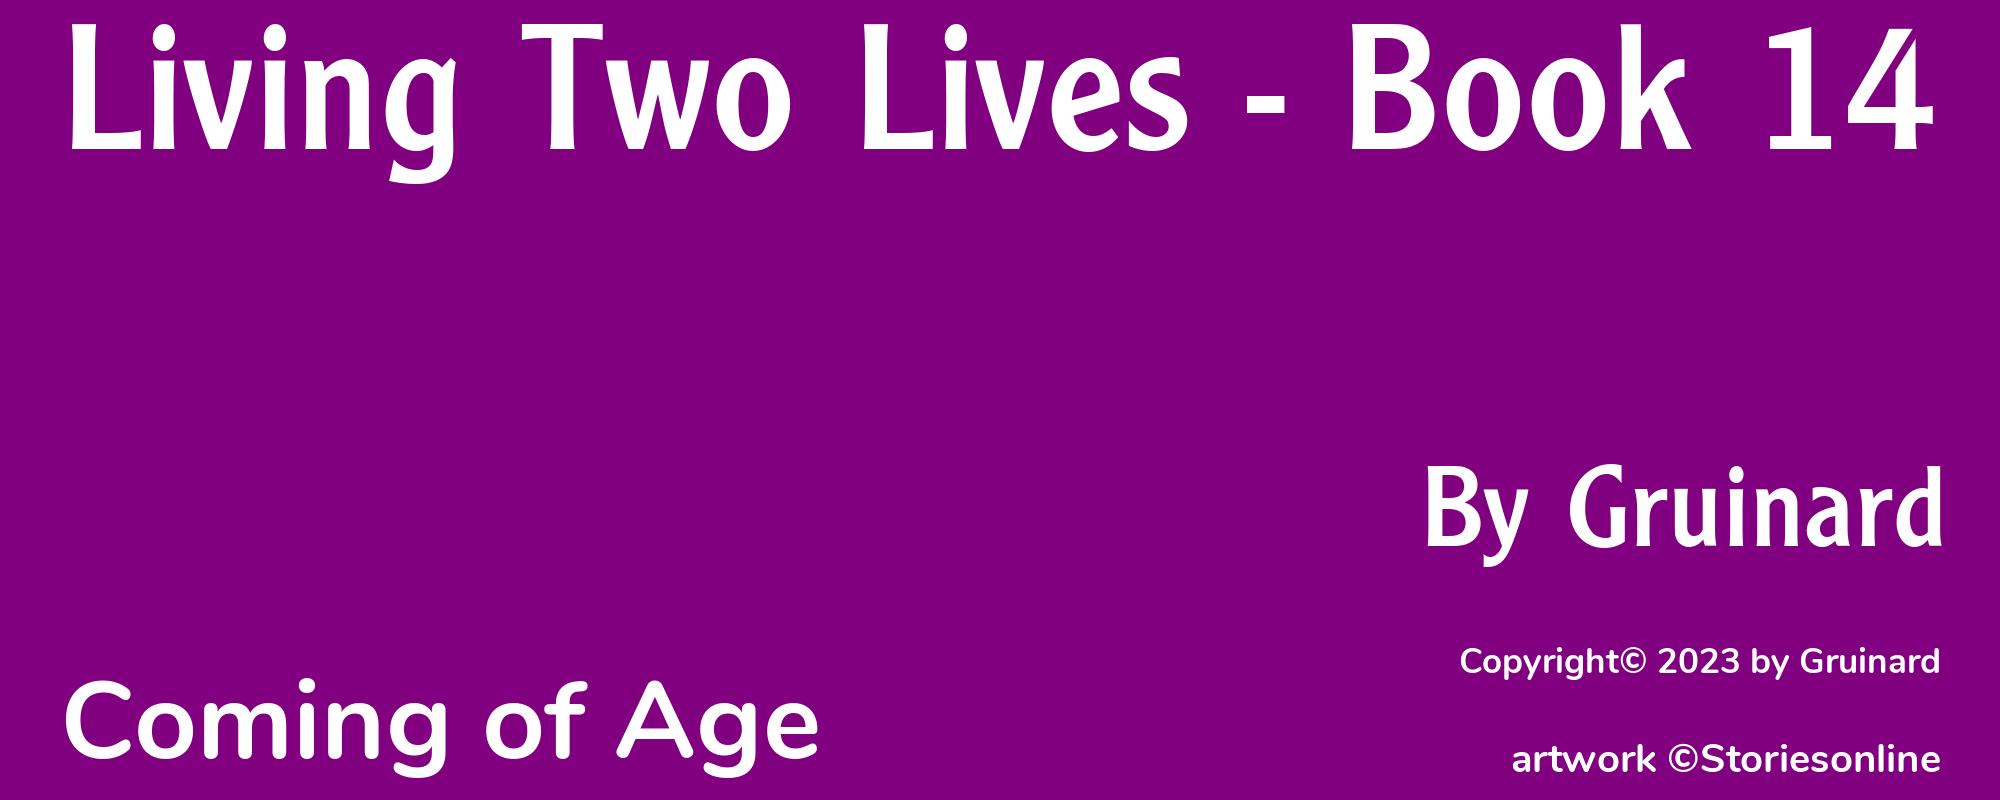 Living Two Lives - Book 14 - Cover